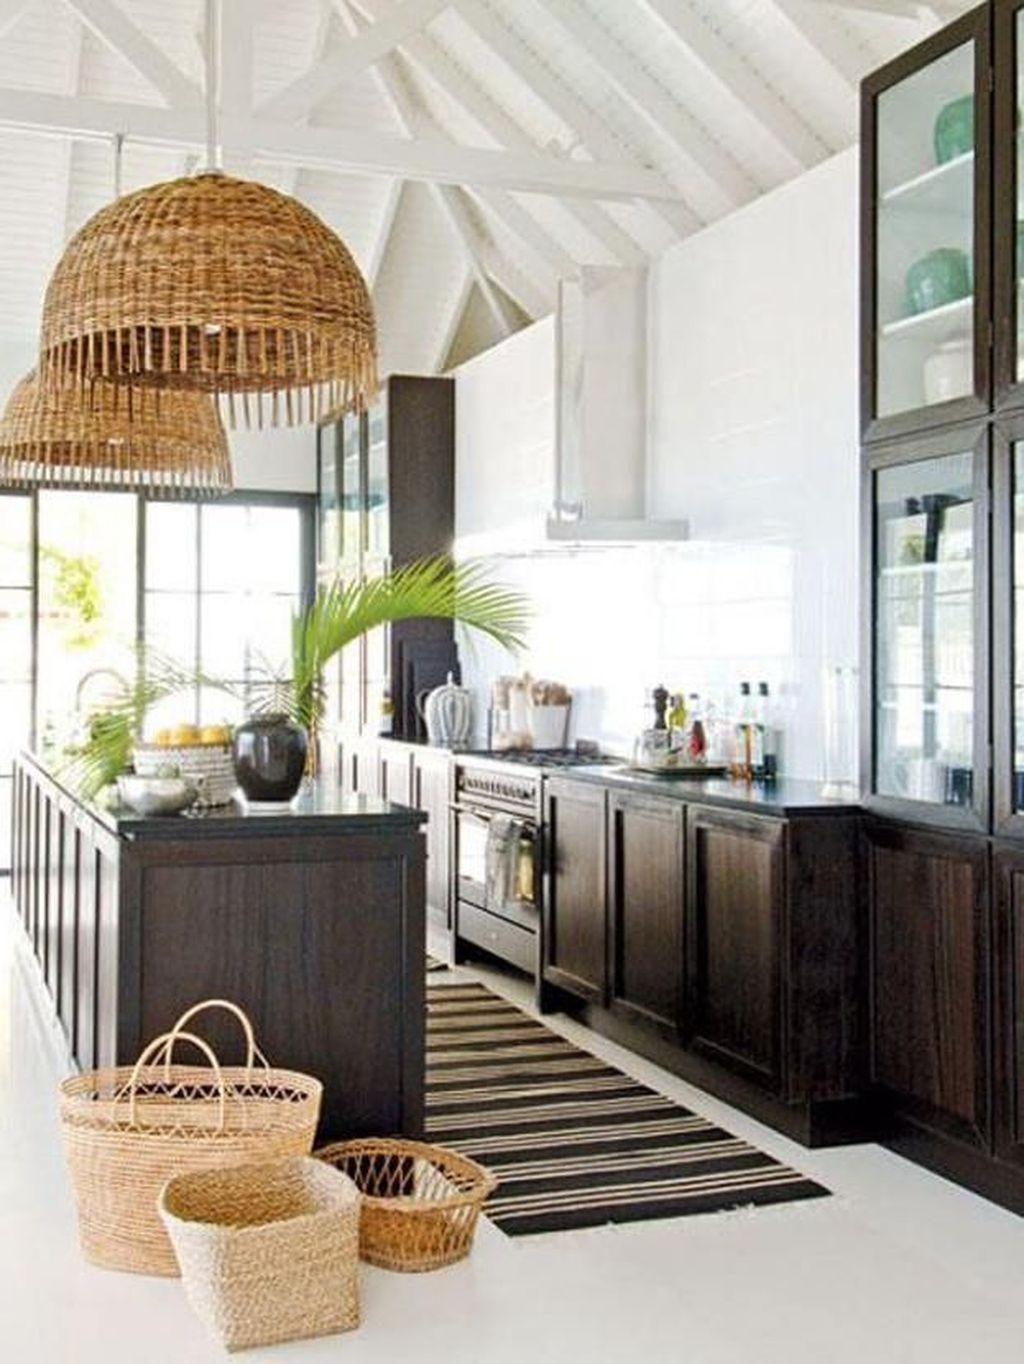 Decorate the kitchen in a tropical style, inspiring a vibrant summer - Photo 3.